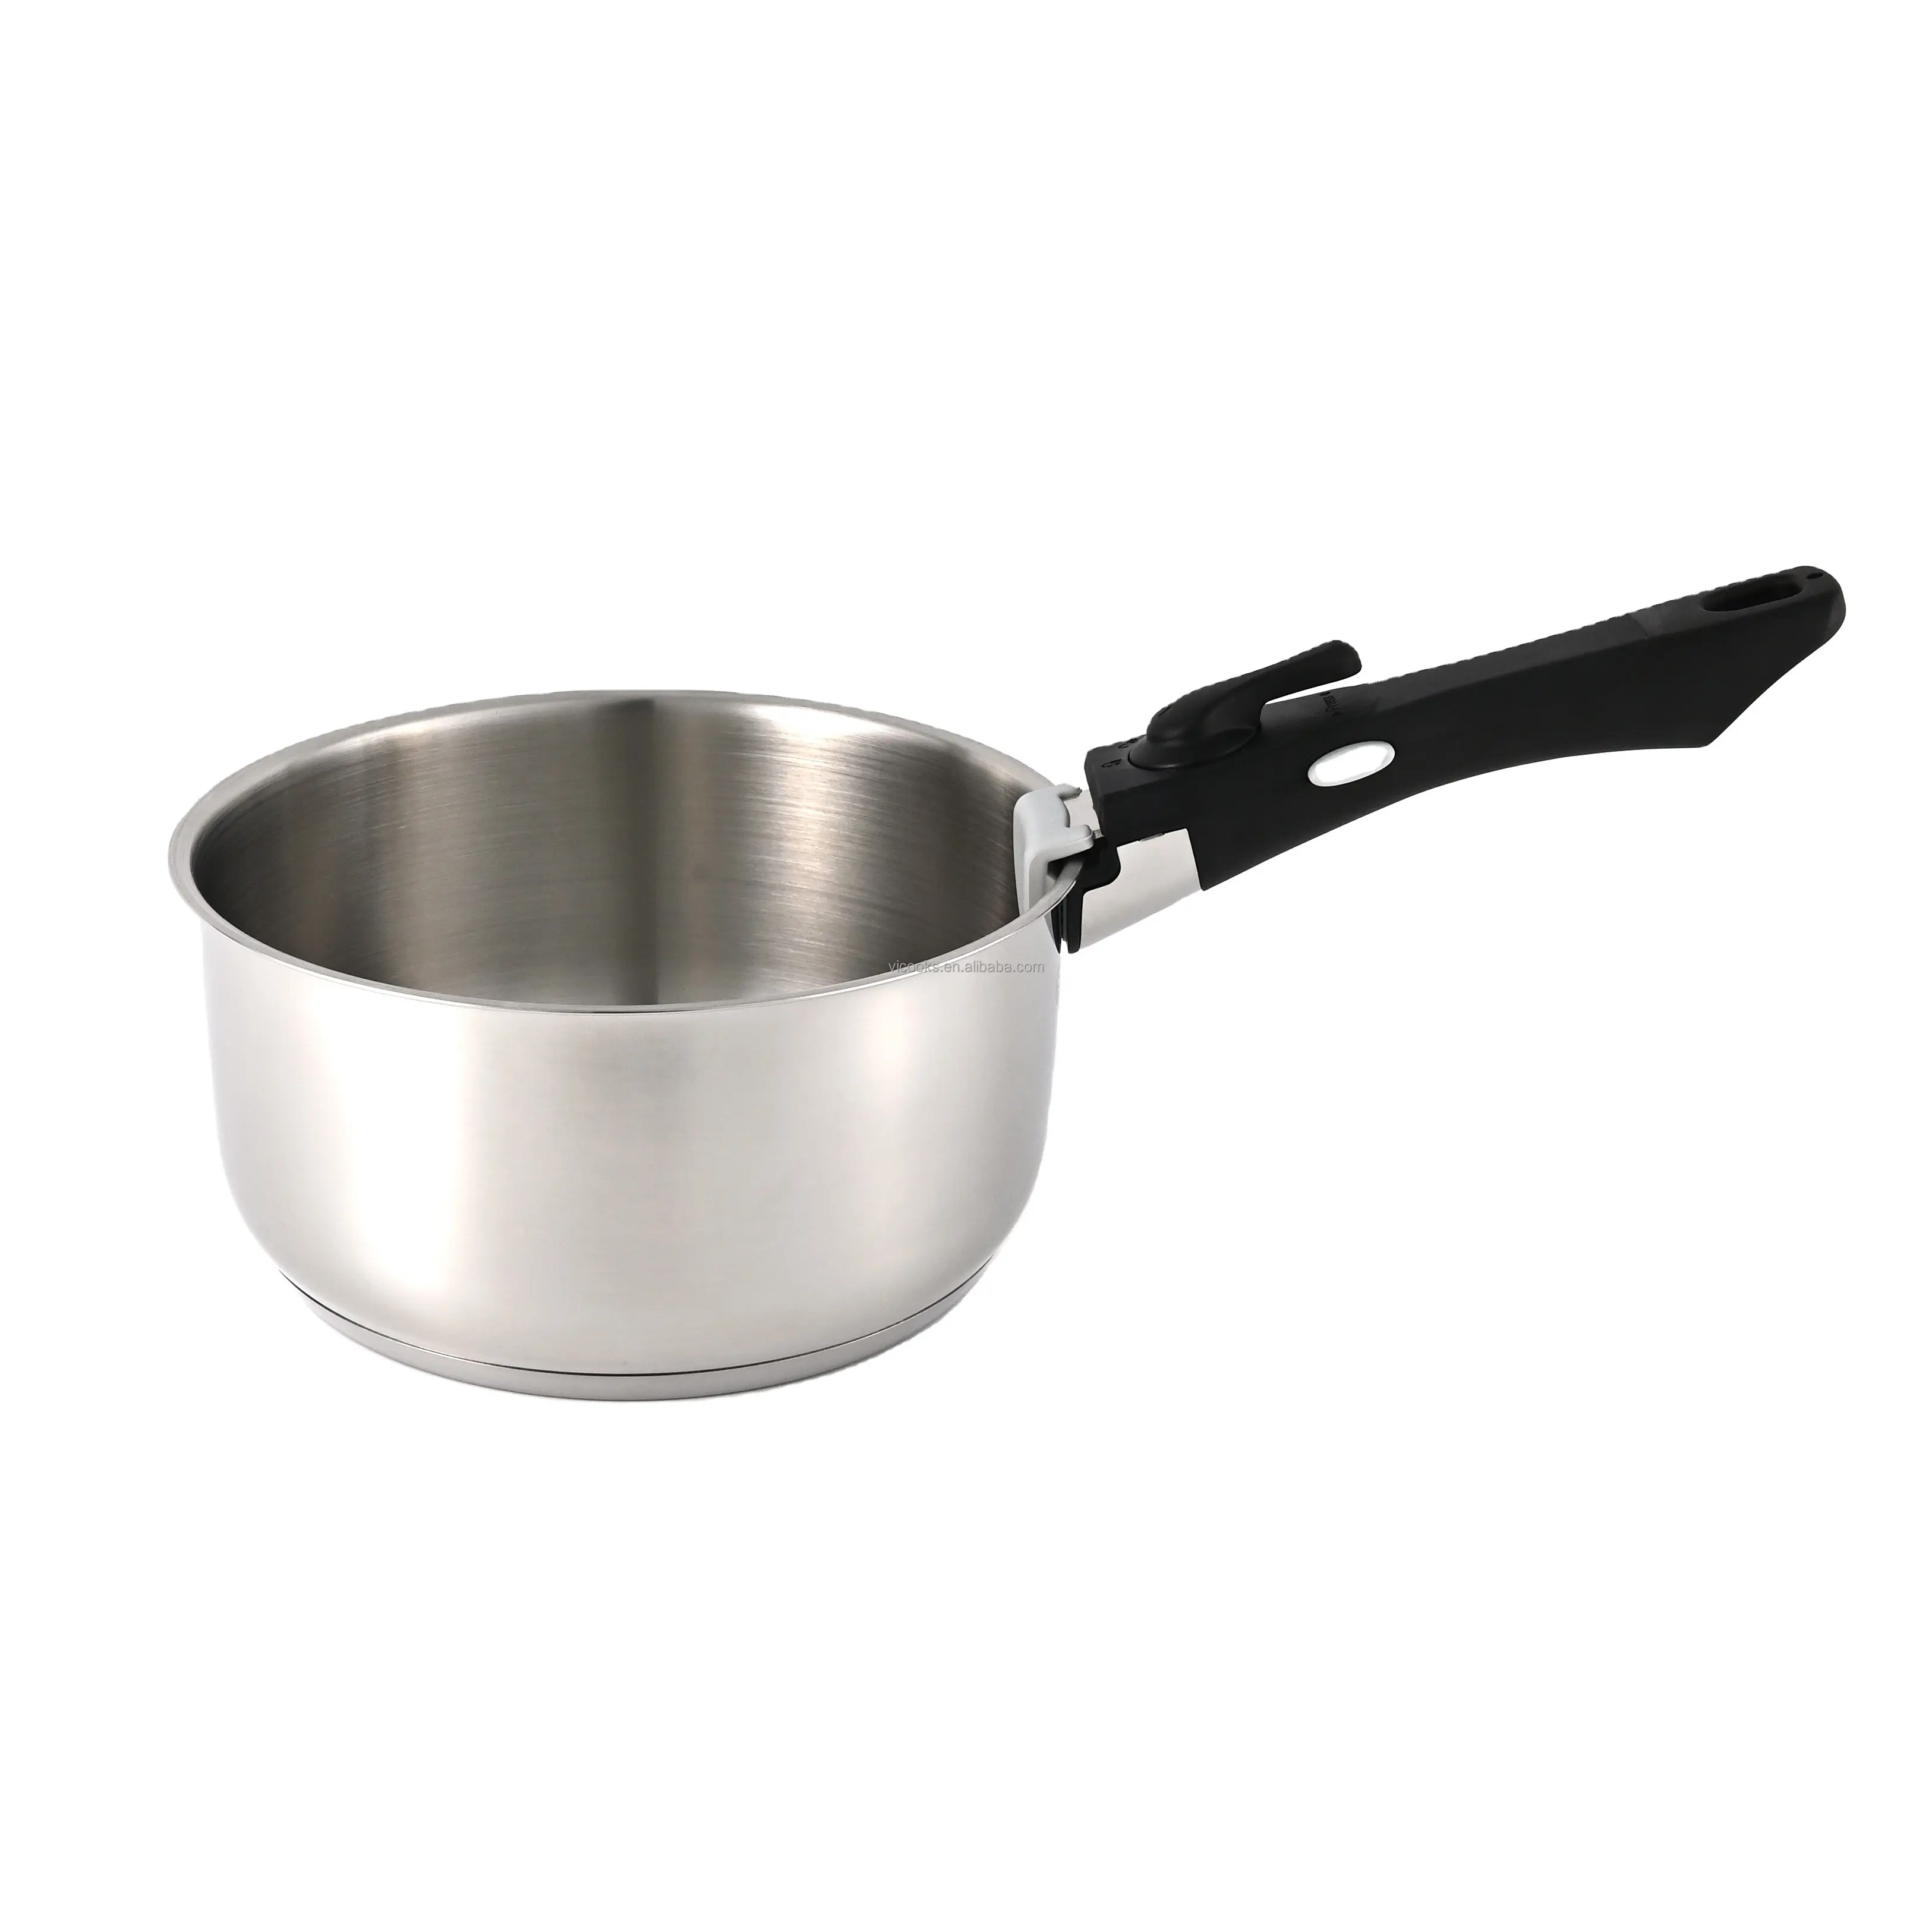 Hot sale home kitchen cooking saucepan pots stainless steel saucepan with removable handle